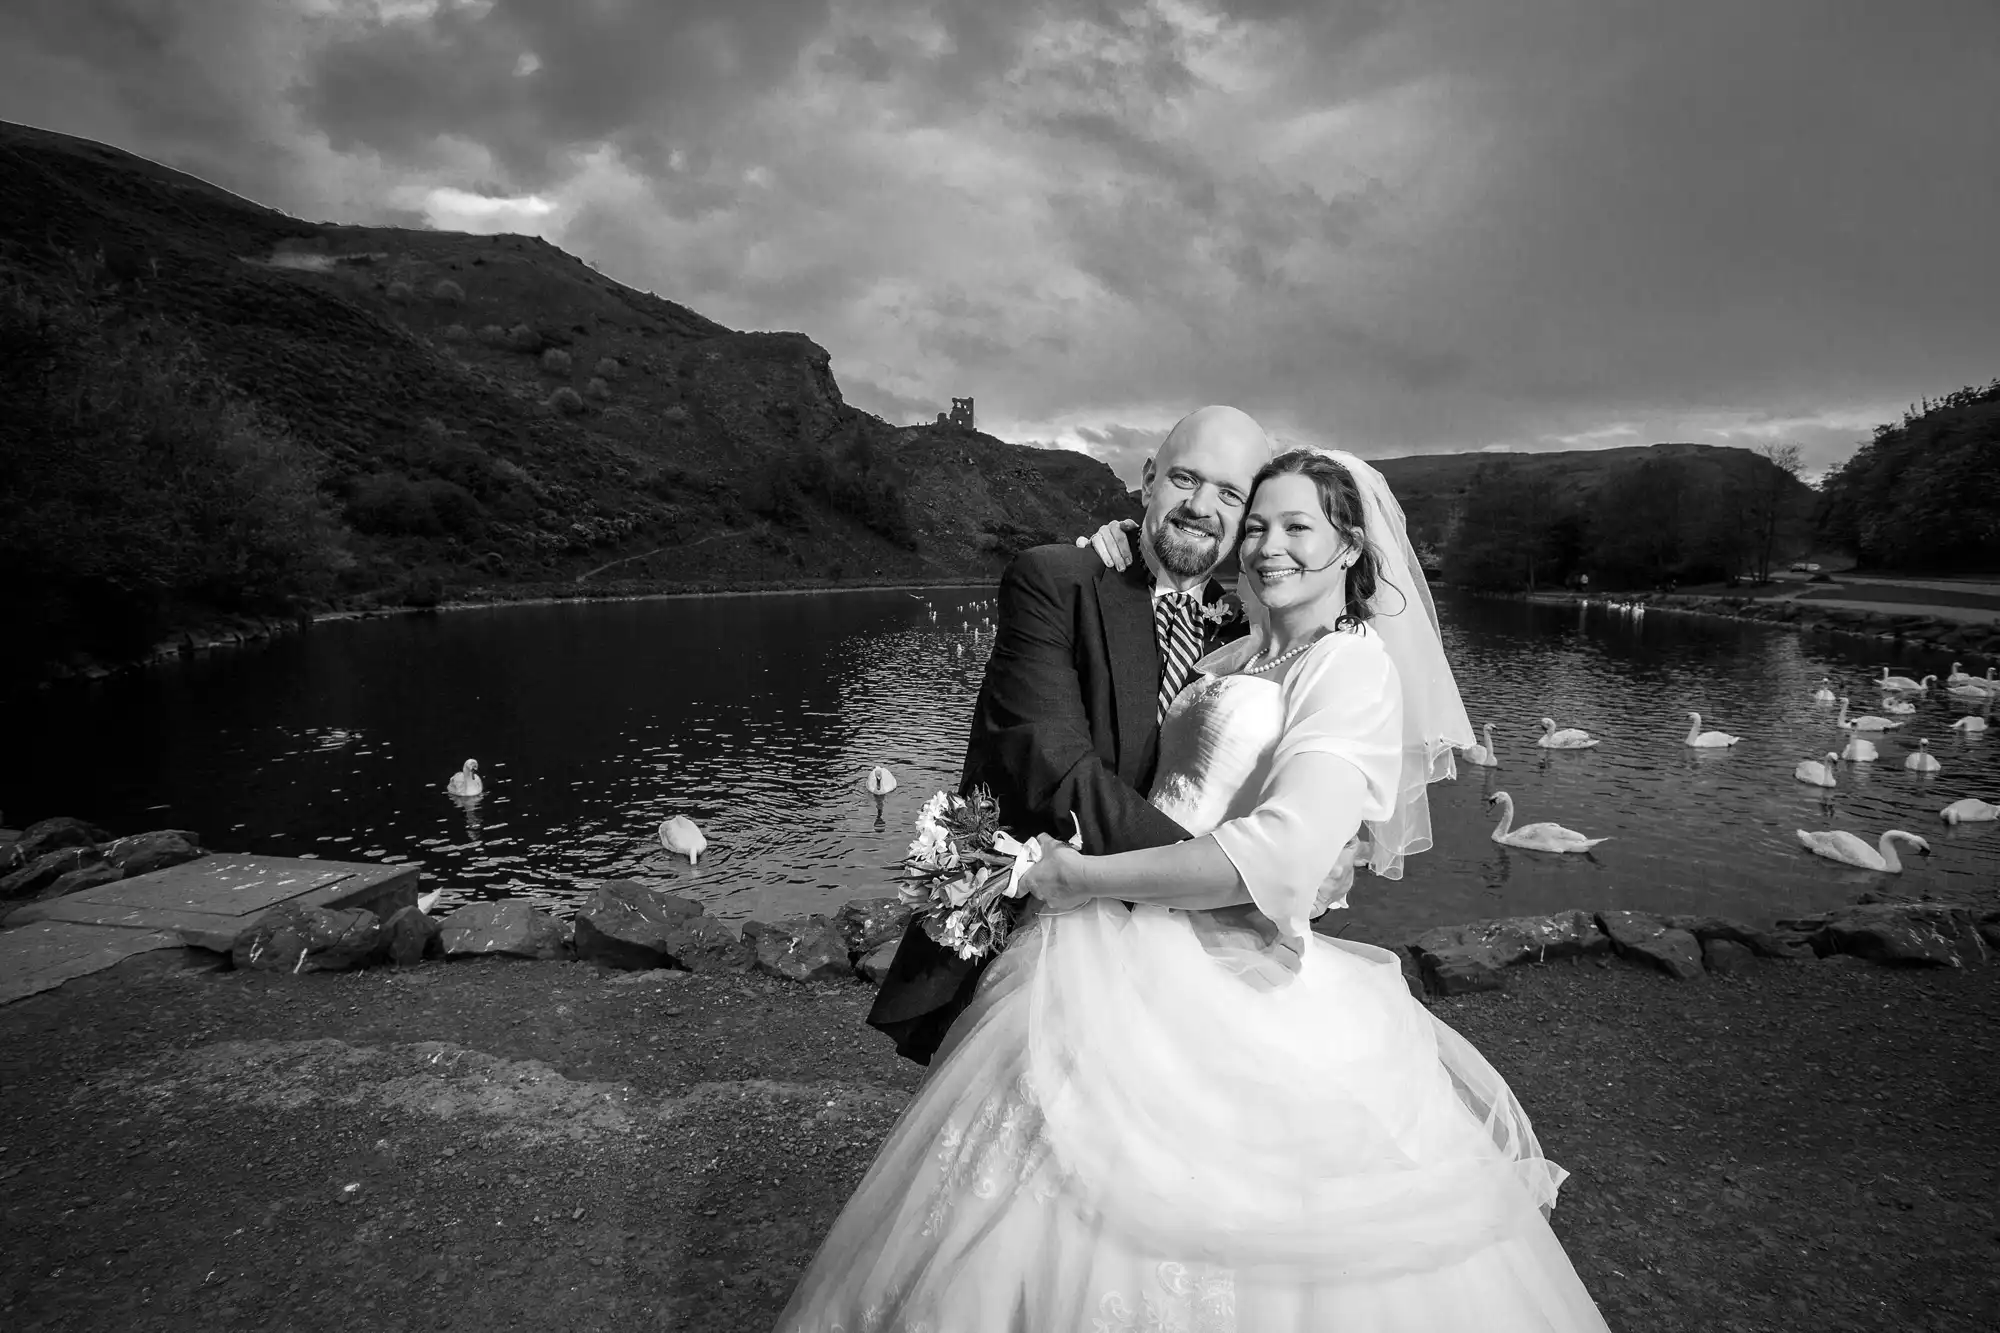 A bride and groom smiling by a lake with swans, under a dramatic sky and a distant castle on a hill.